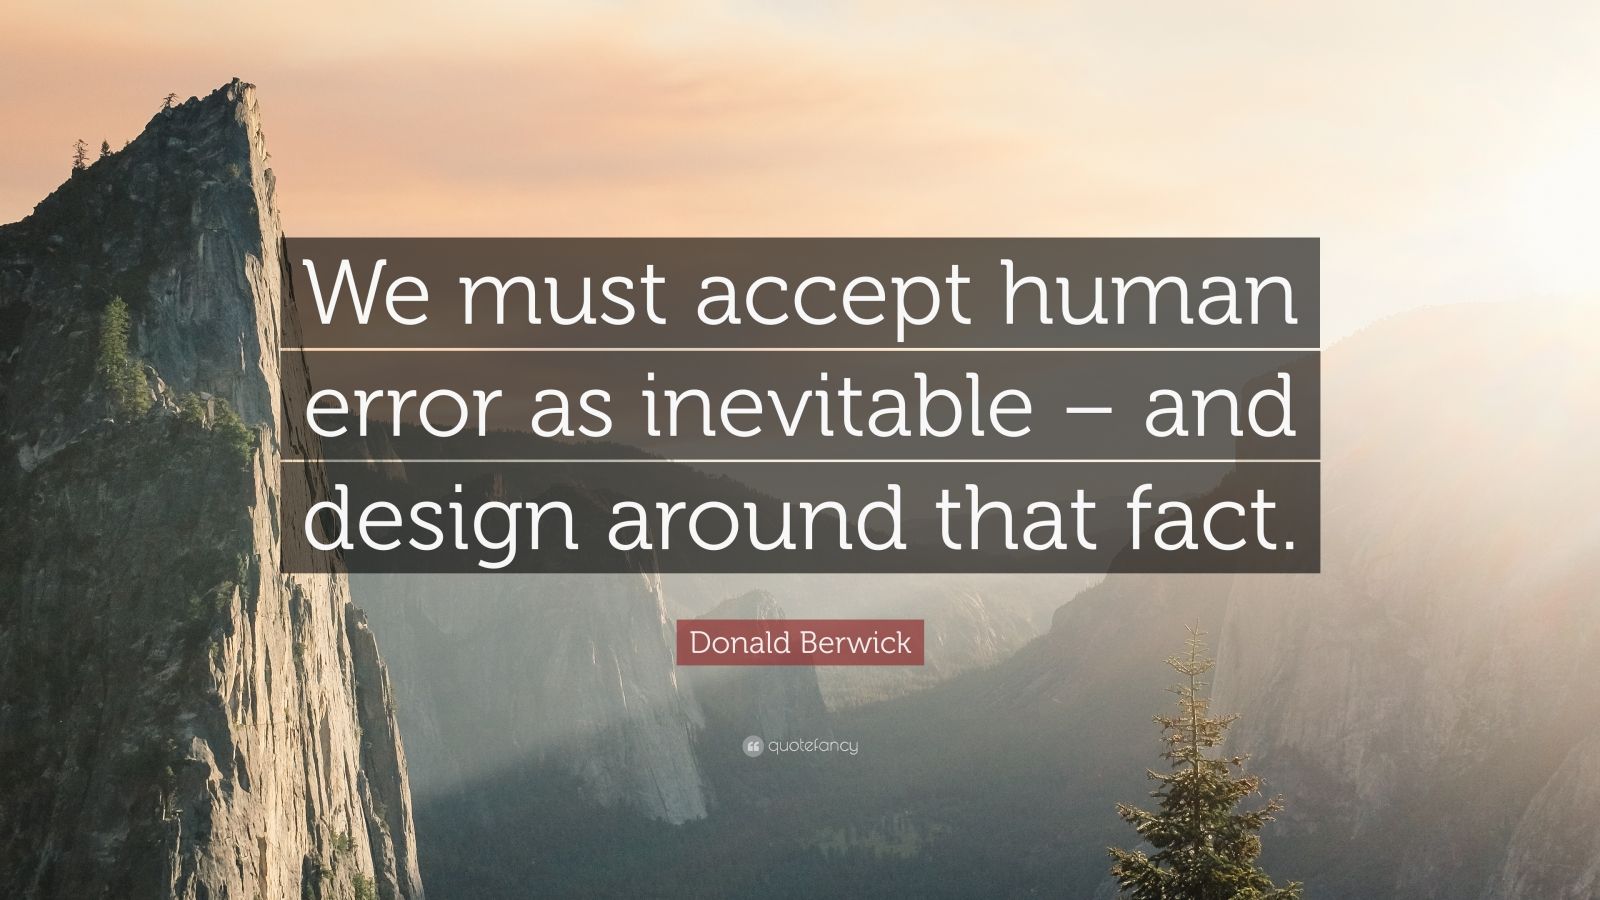 Donald Berwick Quote: “We must accept human error as inevitable – and